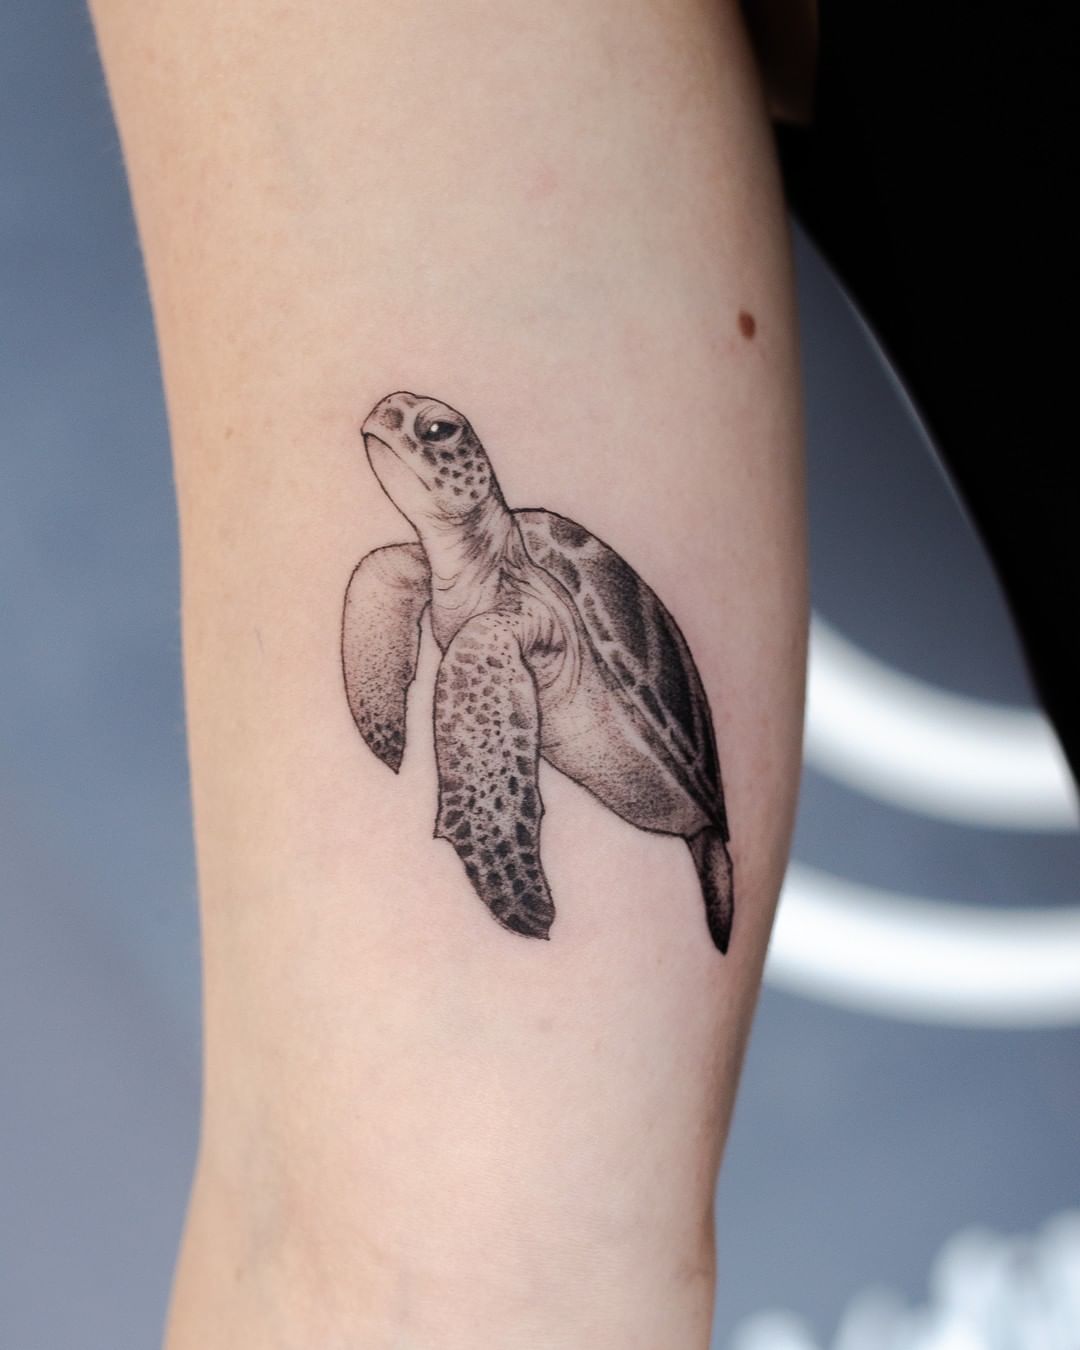 Blackwork turtle tattoos are so cool! The way the turtle is looking slightly away from the viewer, like it's in deep thought or lost in its own world is quite amazing. You should go and get it.